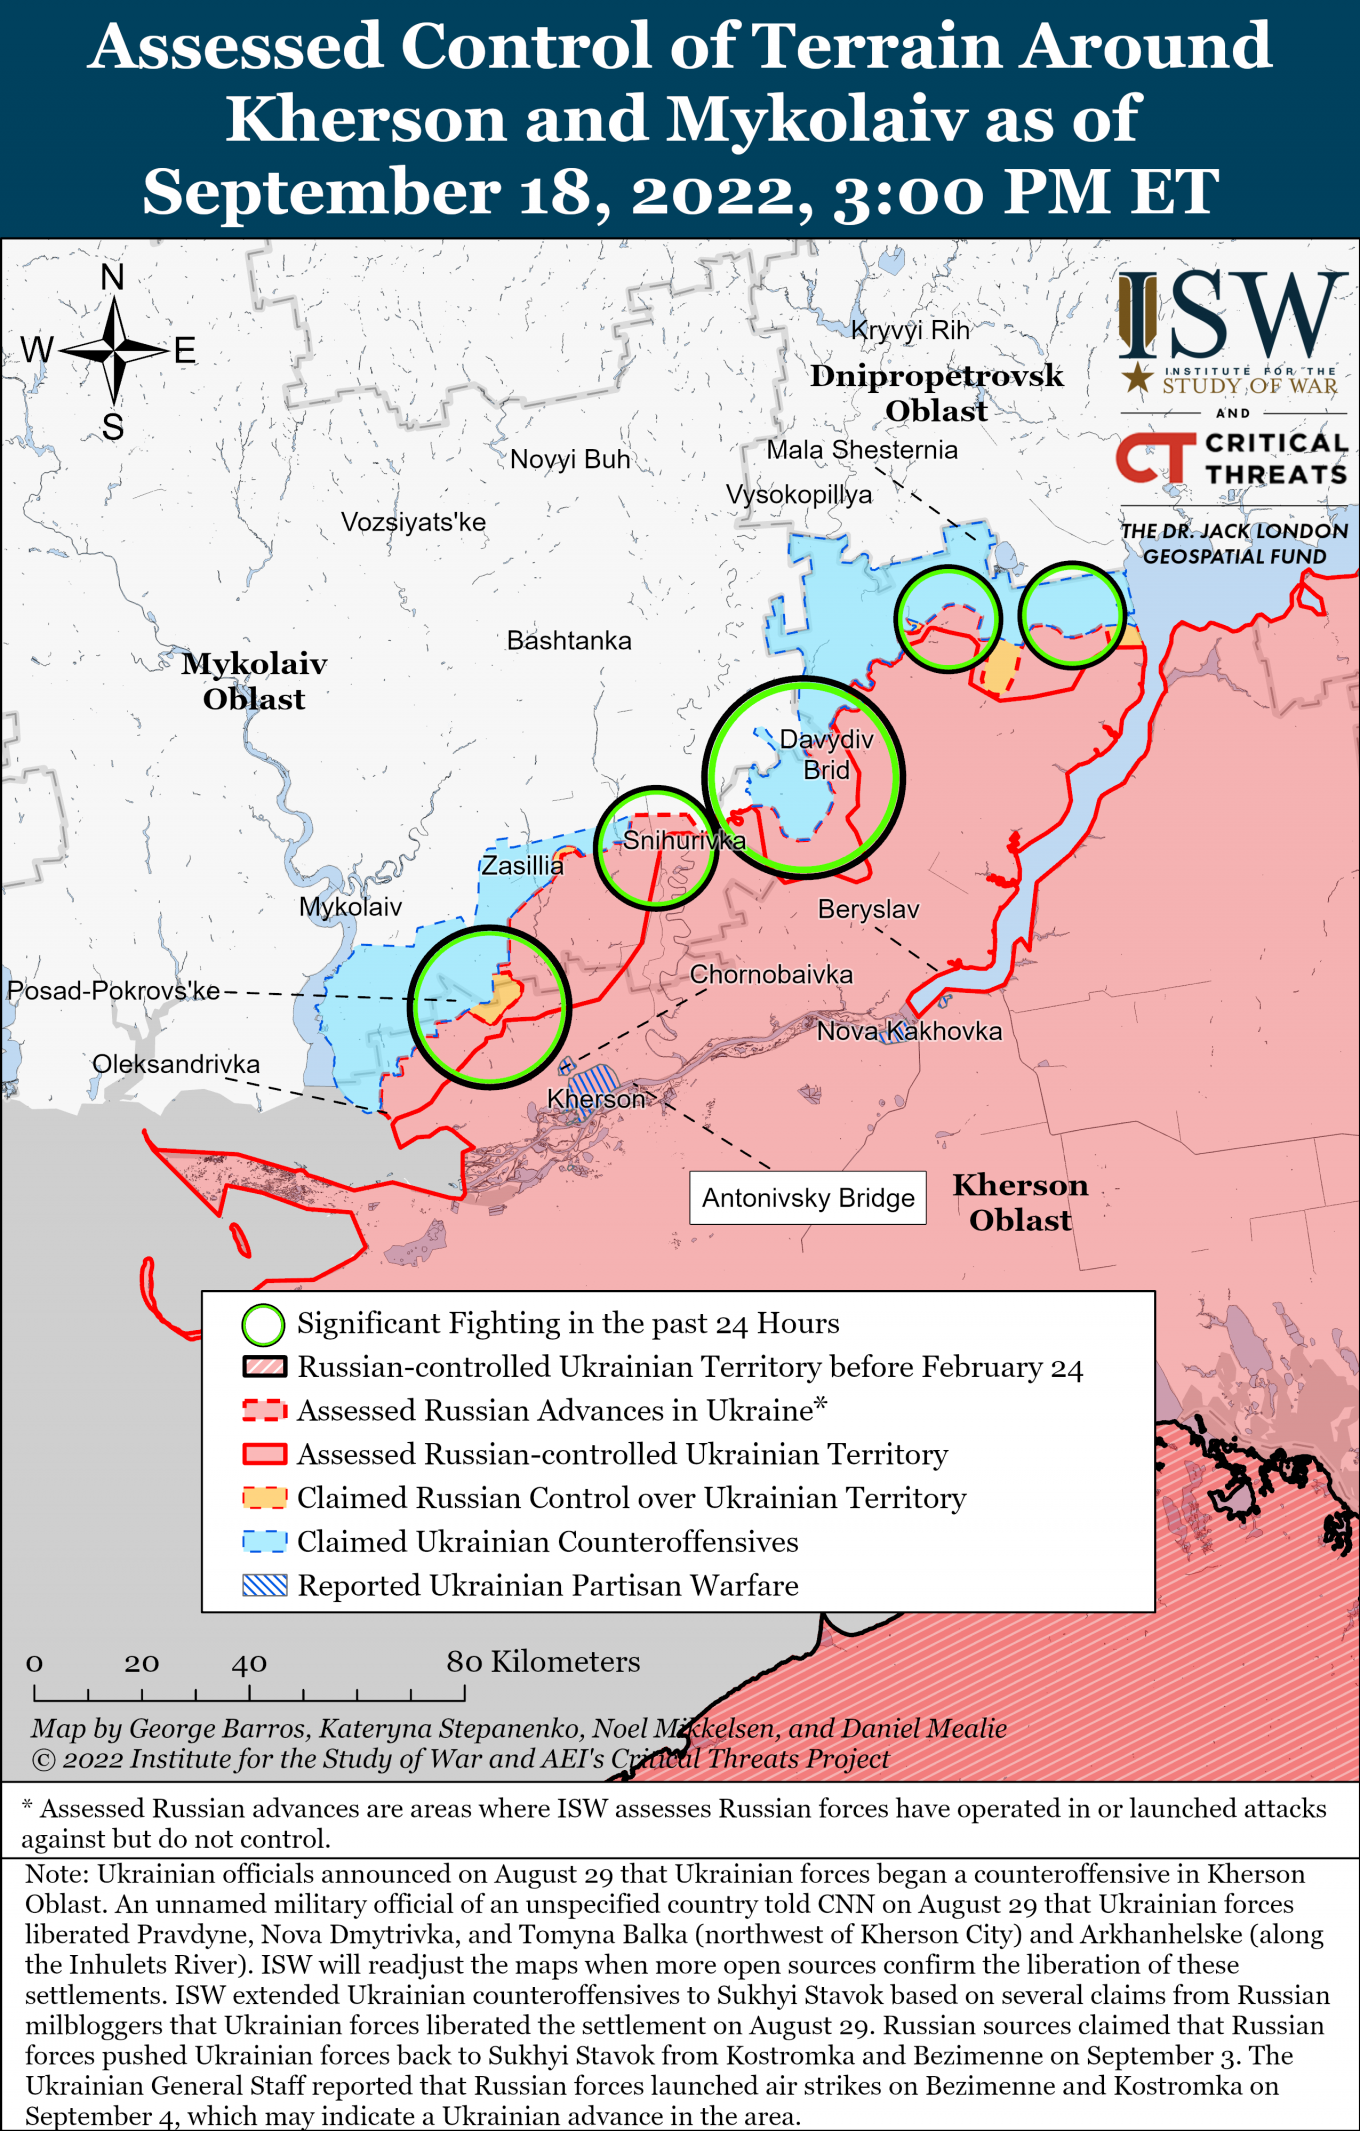 Russians Try to Prevent a Chaotic Escape From Kherson Oblast, the Order 